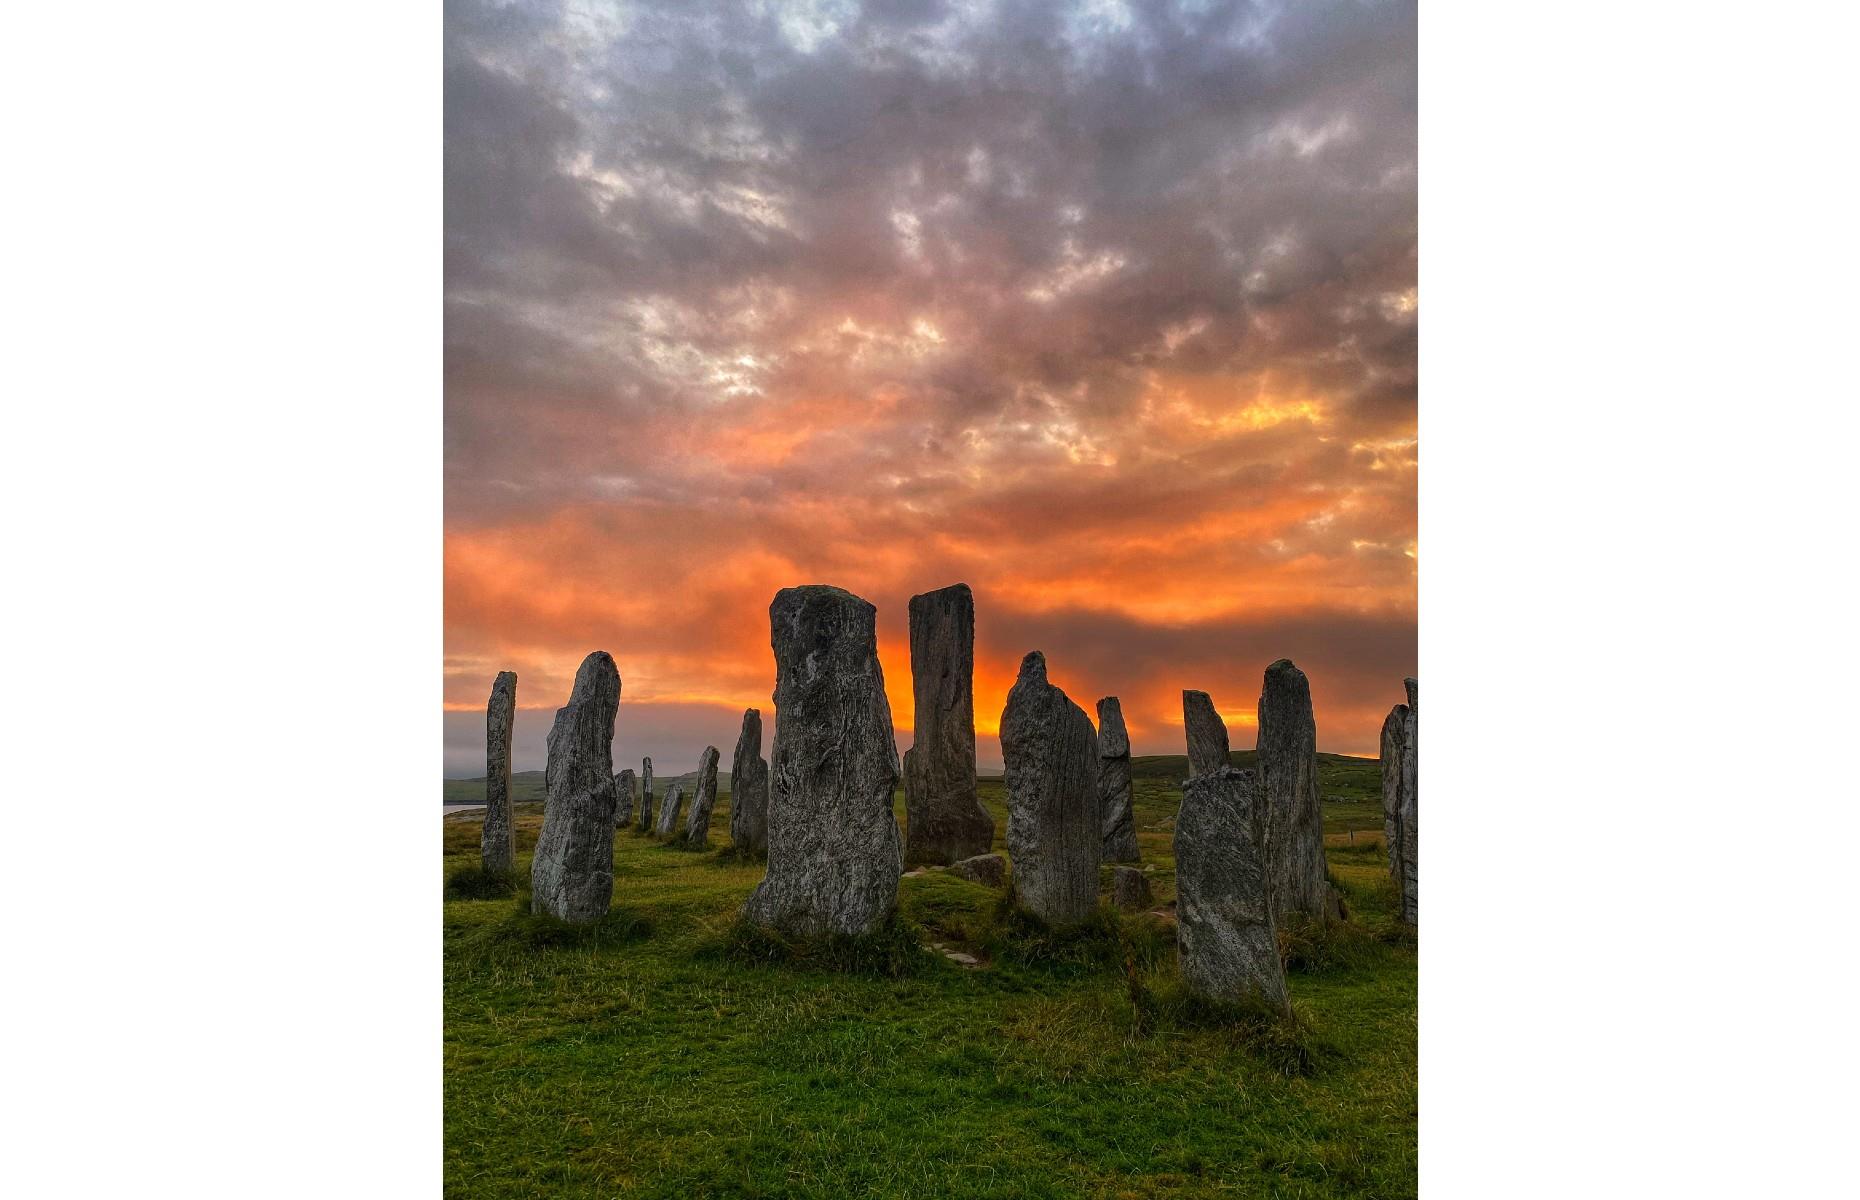 <p>Dating back around 5,000 years, the Calanais Standing Stones are one of Scotland's best-preserved Neolithic monuments and actually predate England's Stonehenge. Derek Mccrimmon has beautifully captured the cross-shaped stone circle in this magical image, in which the ancient monument appears ignited by fiery-hued clouds. </p>  <p><a href="https://www.loveexploring.com/galleries/127724/30-amazing-sights-older-than-stonehenge?page=1"><strong>Discover the amazing sights that are older than Stonehenge</strong></a></p>